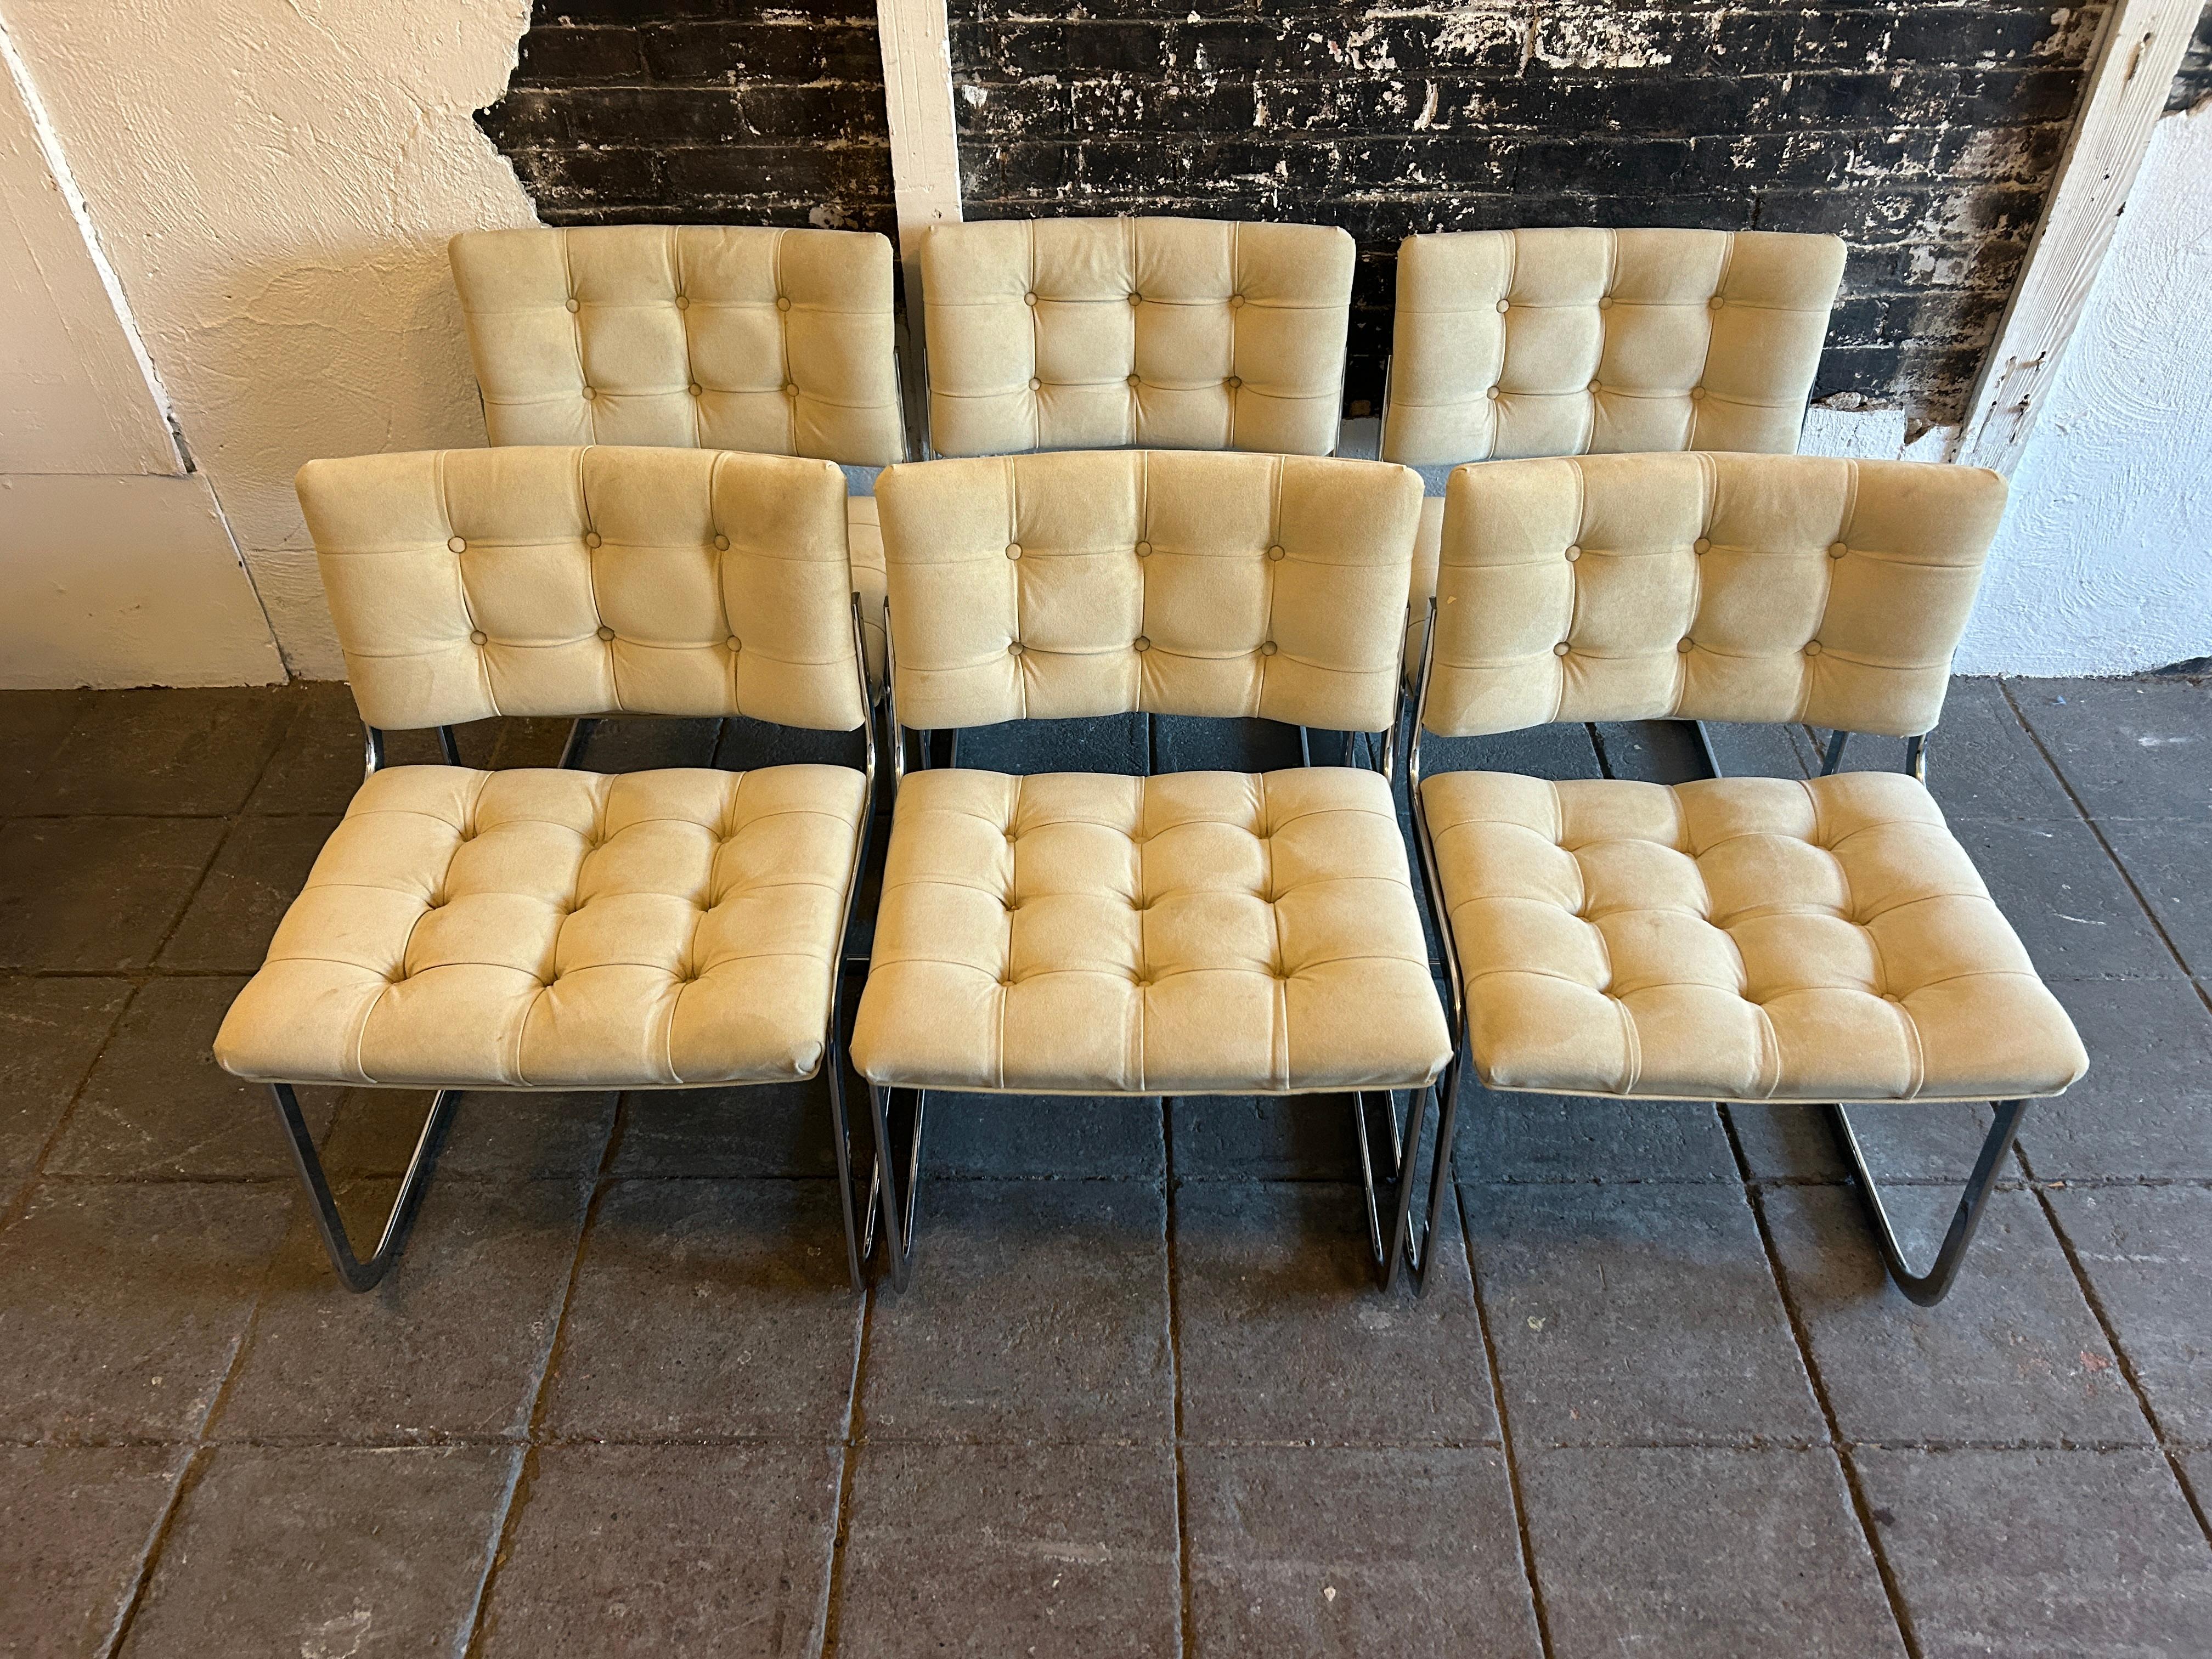 A unique set of (8) RH-304 Suede/ Leather chairs. designed by Robert Haussmann and manufactured by Stendig De Sede. This set was made circa 1960. these chairs are upholstered in Light Tan Suede / leather. The rounded flat bar tube frames are made of